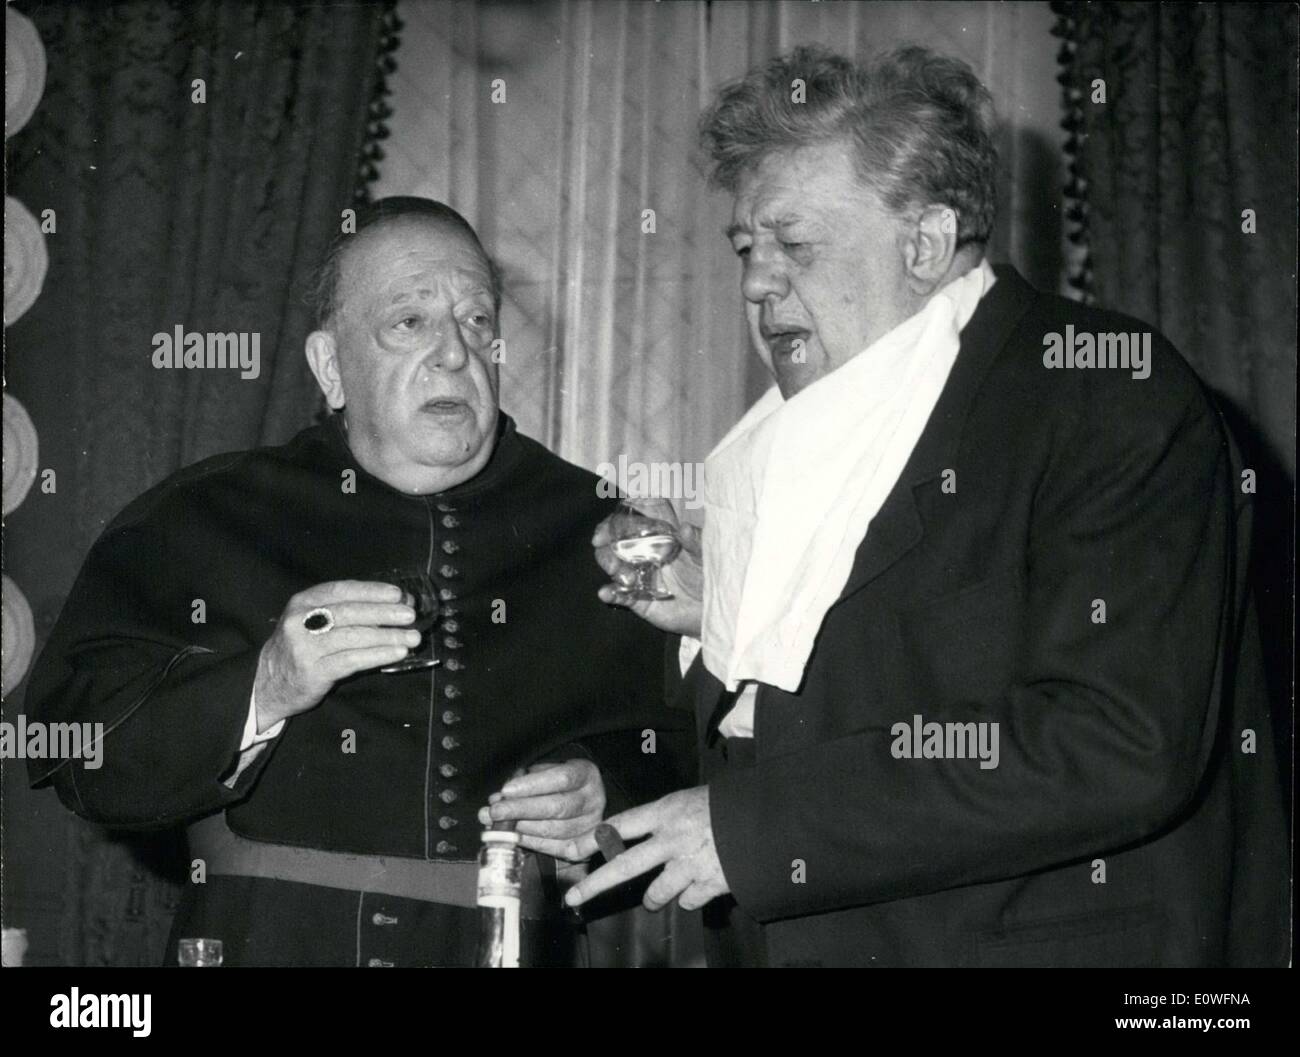 Sep. 02, 1962 - Julien Duvuvier directed the movie. Baroux plays a bishop and Simon plays his childhood friend. : Stock Photo